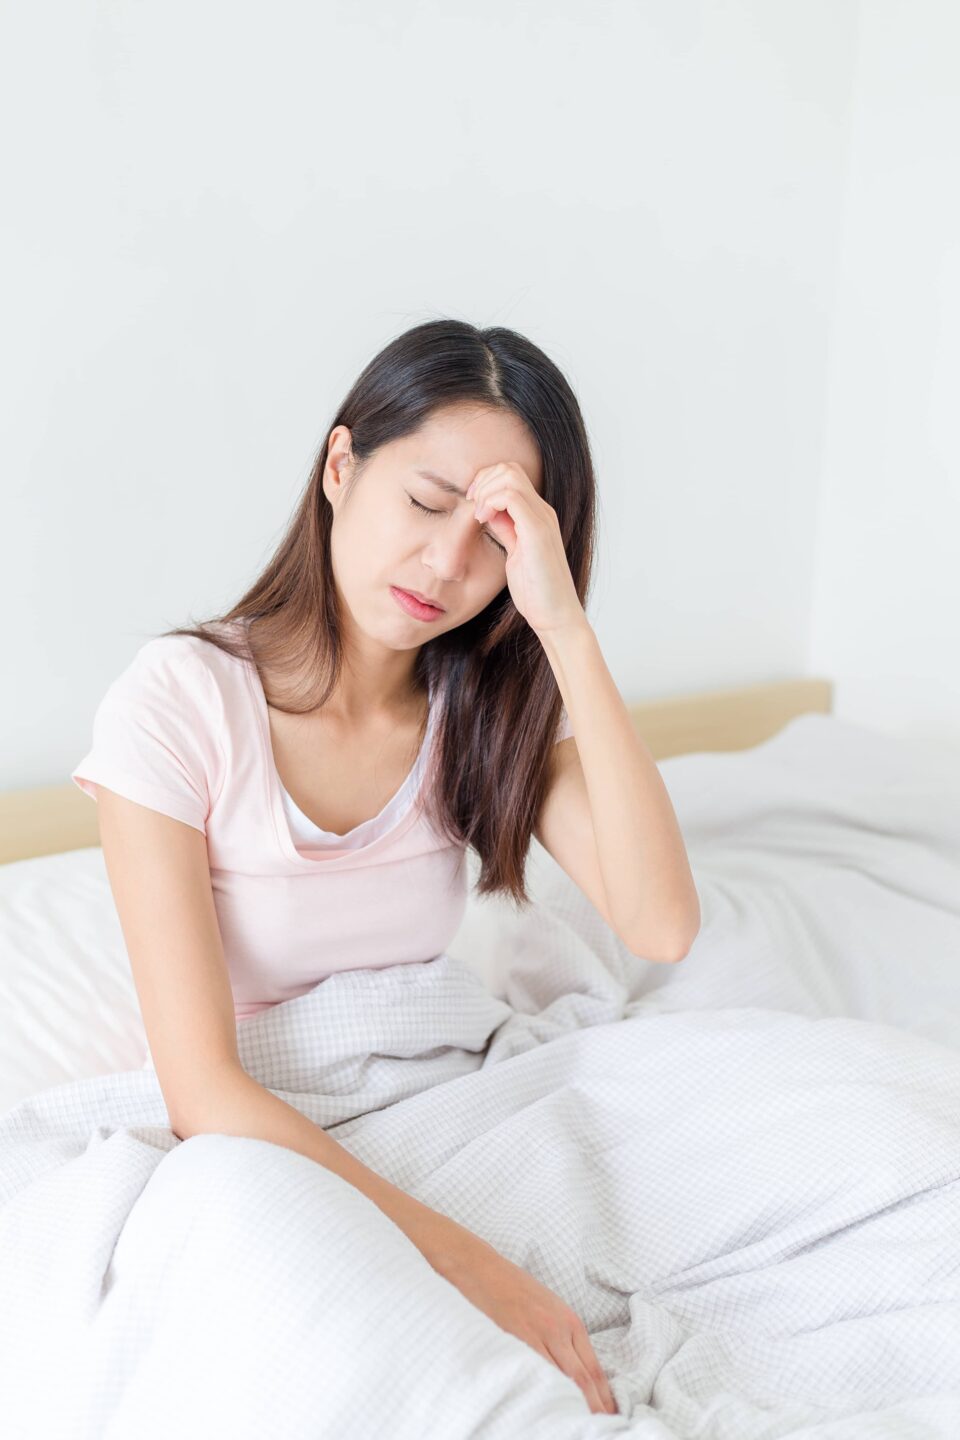 Ayurvedic doctor suggests home remedies for morning dizziness